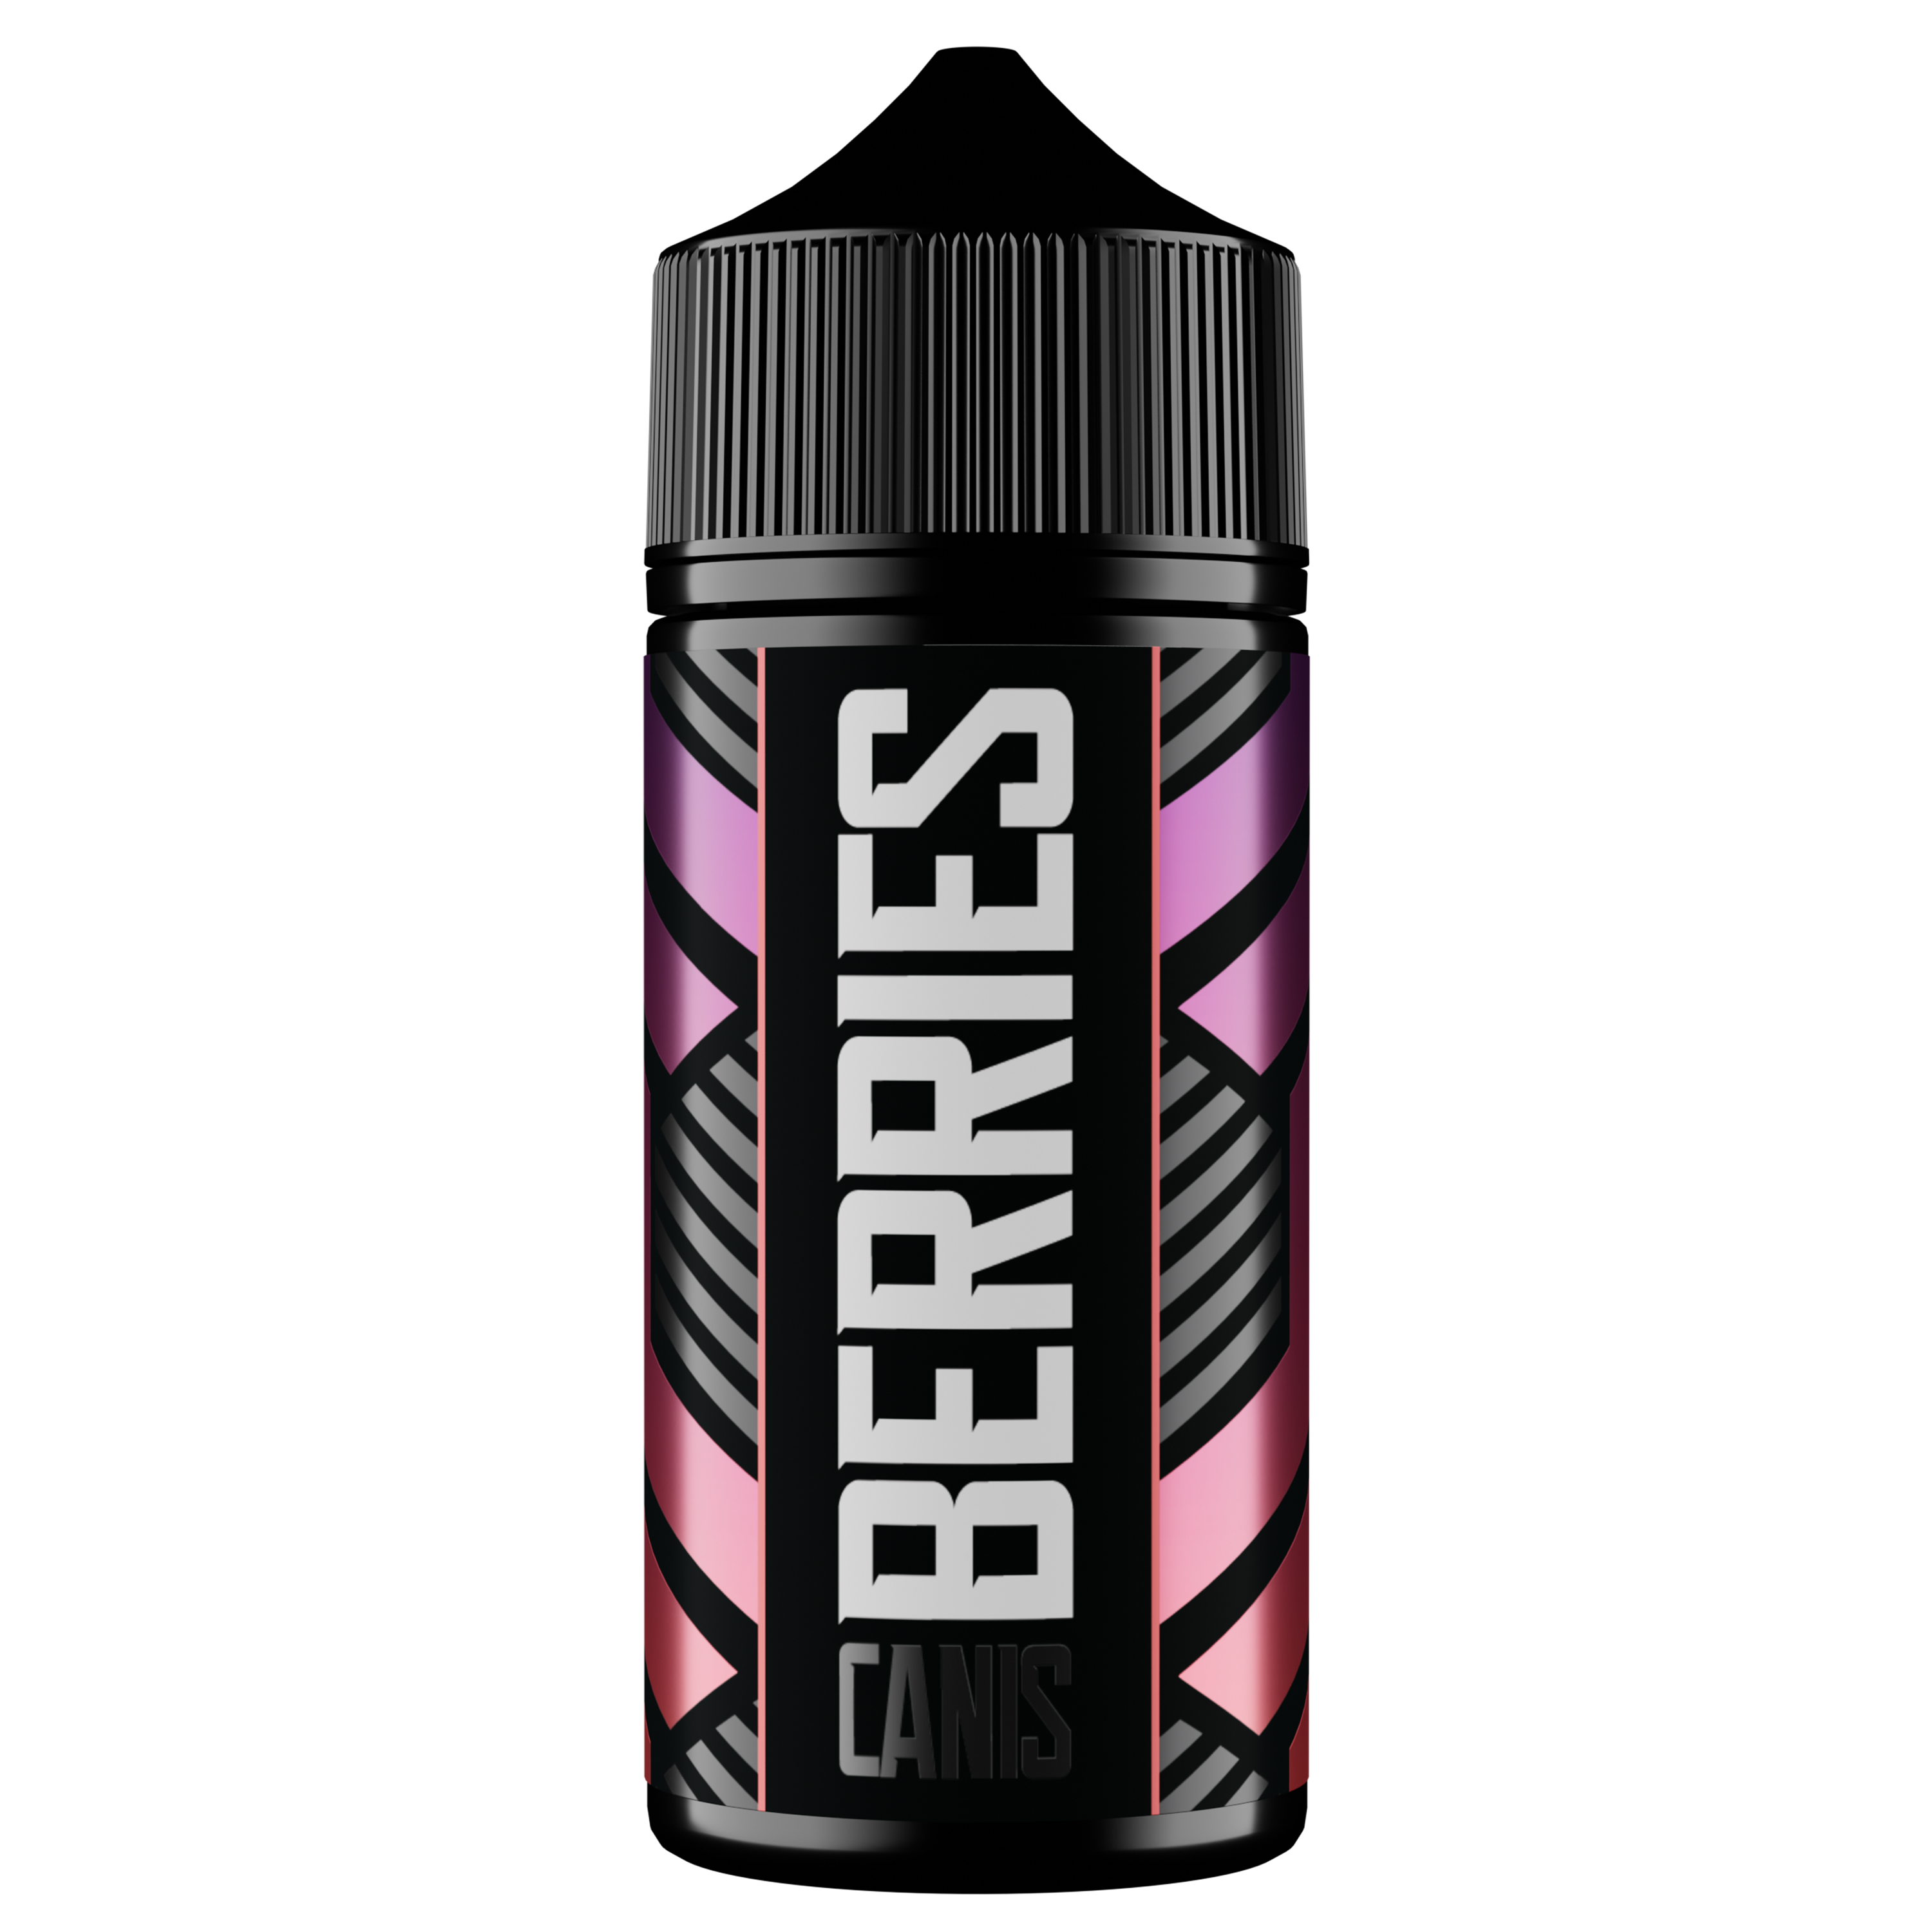 Berries by Canis E-Juice 100ml